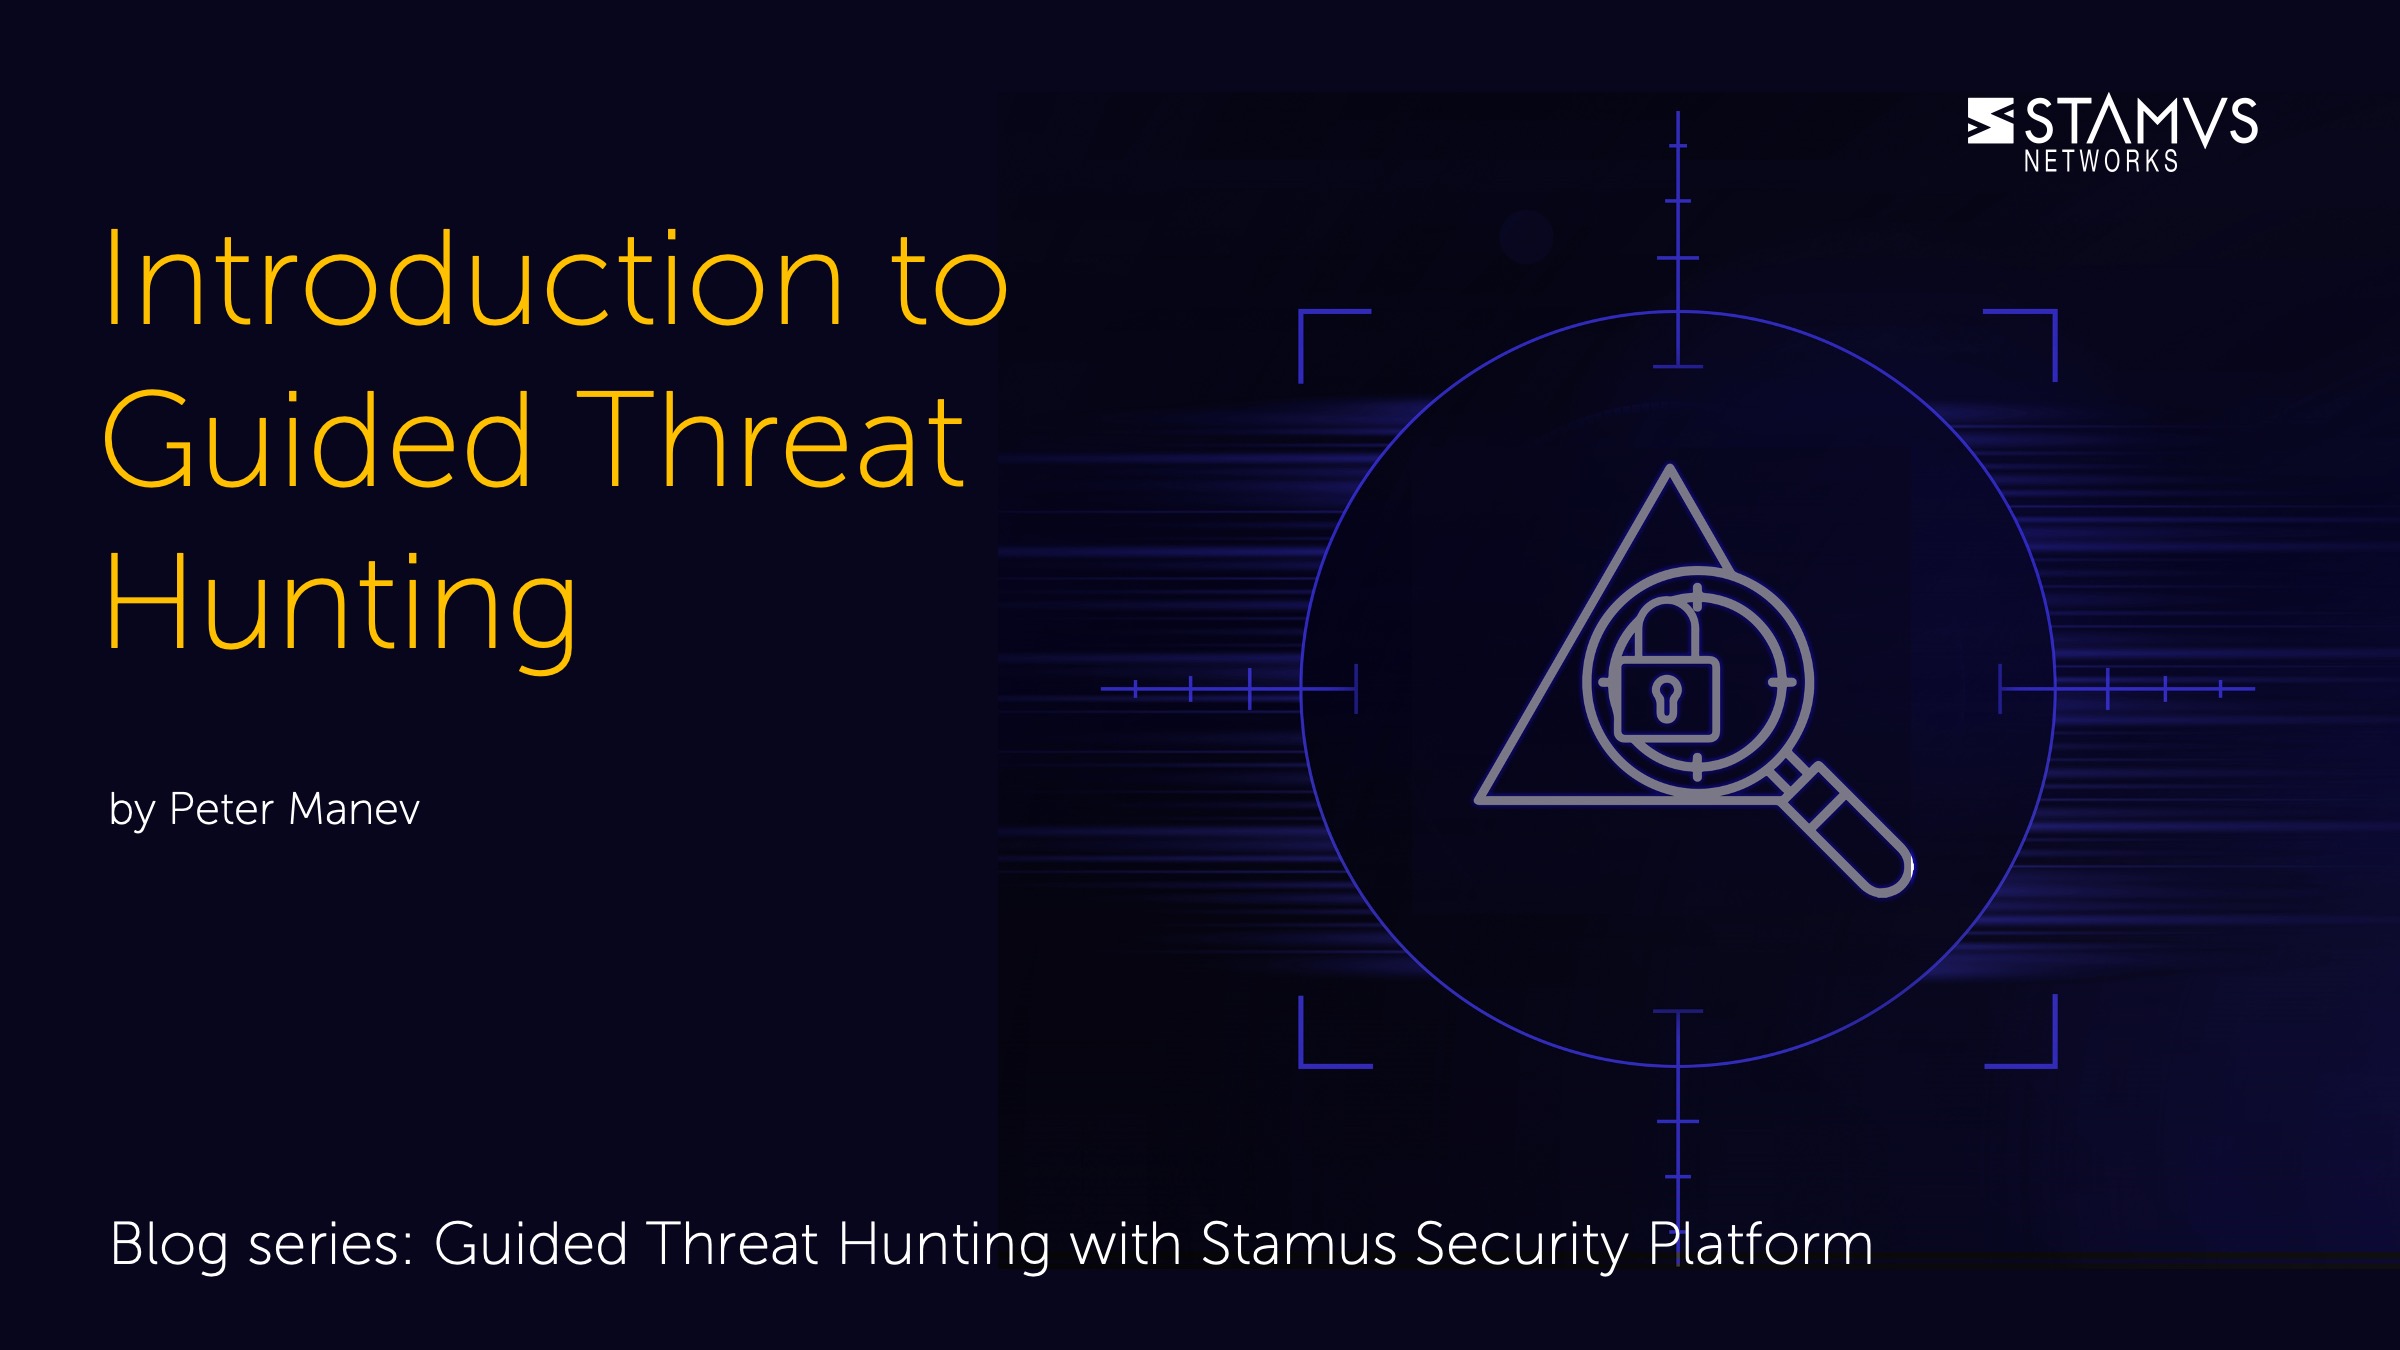 Introduction to Guided Threat Hunting by Peter Manev